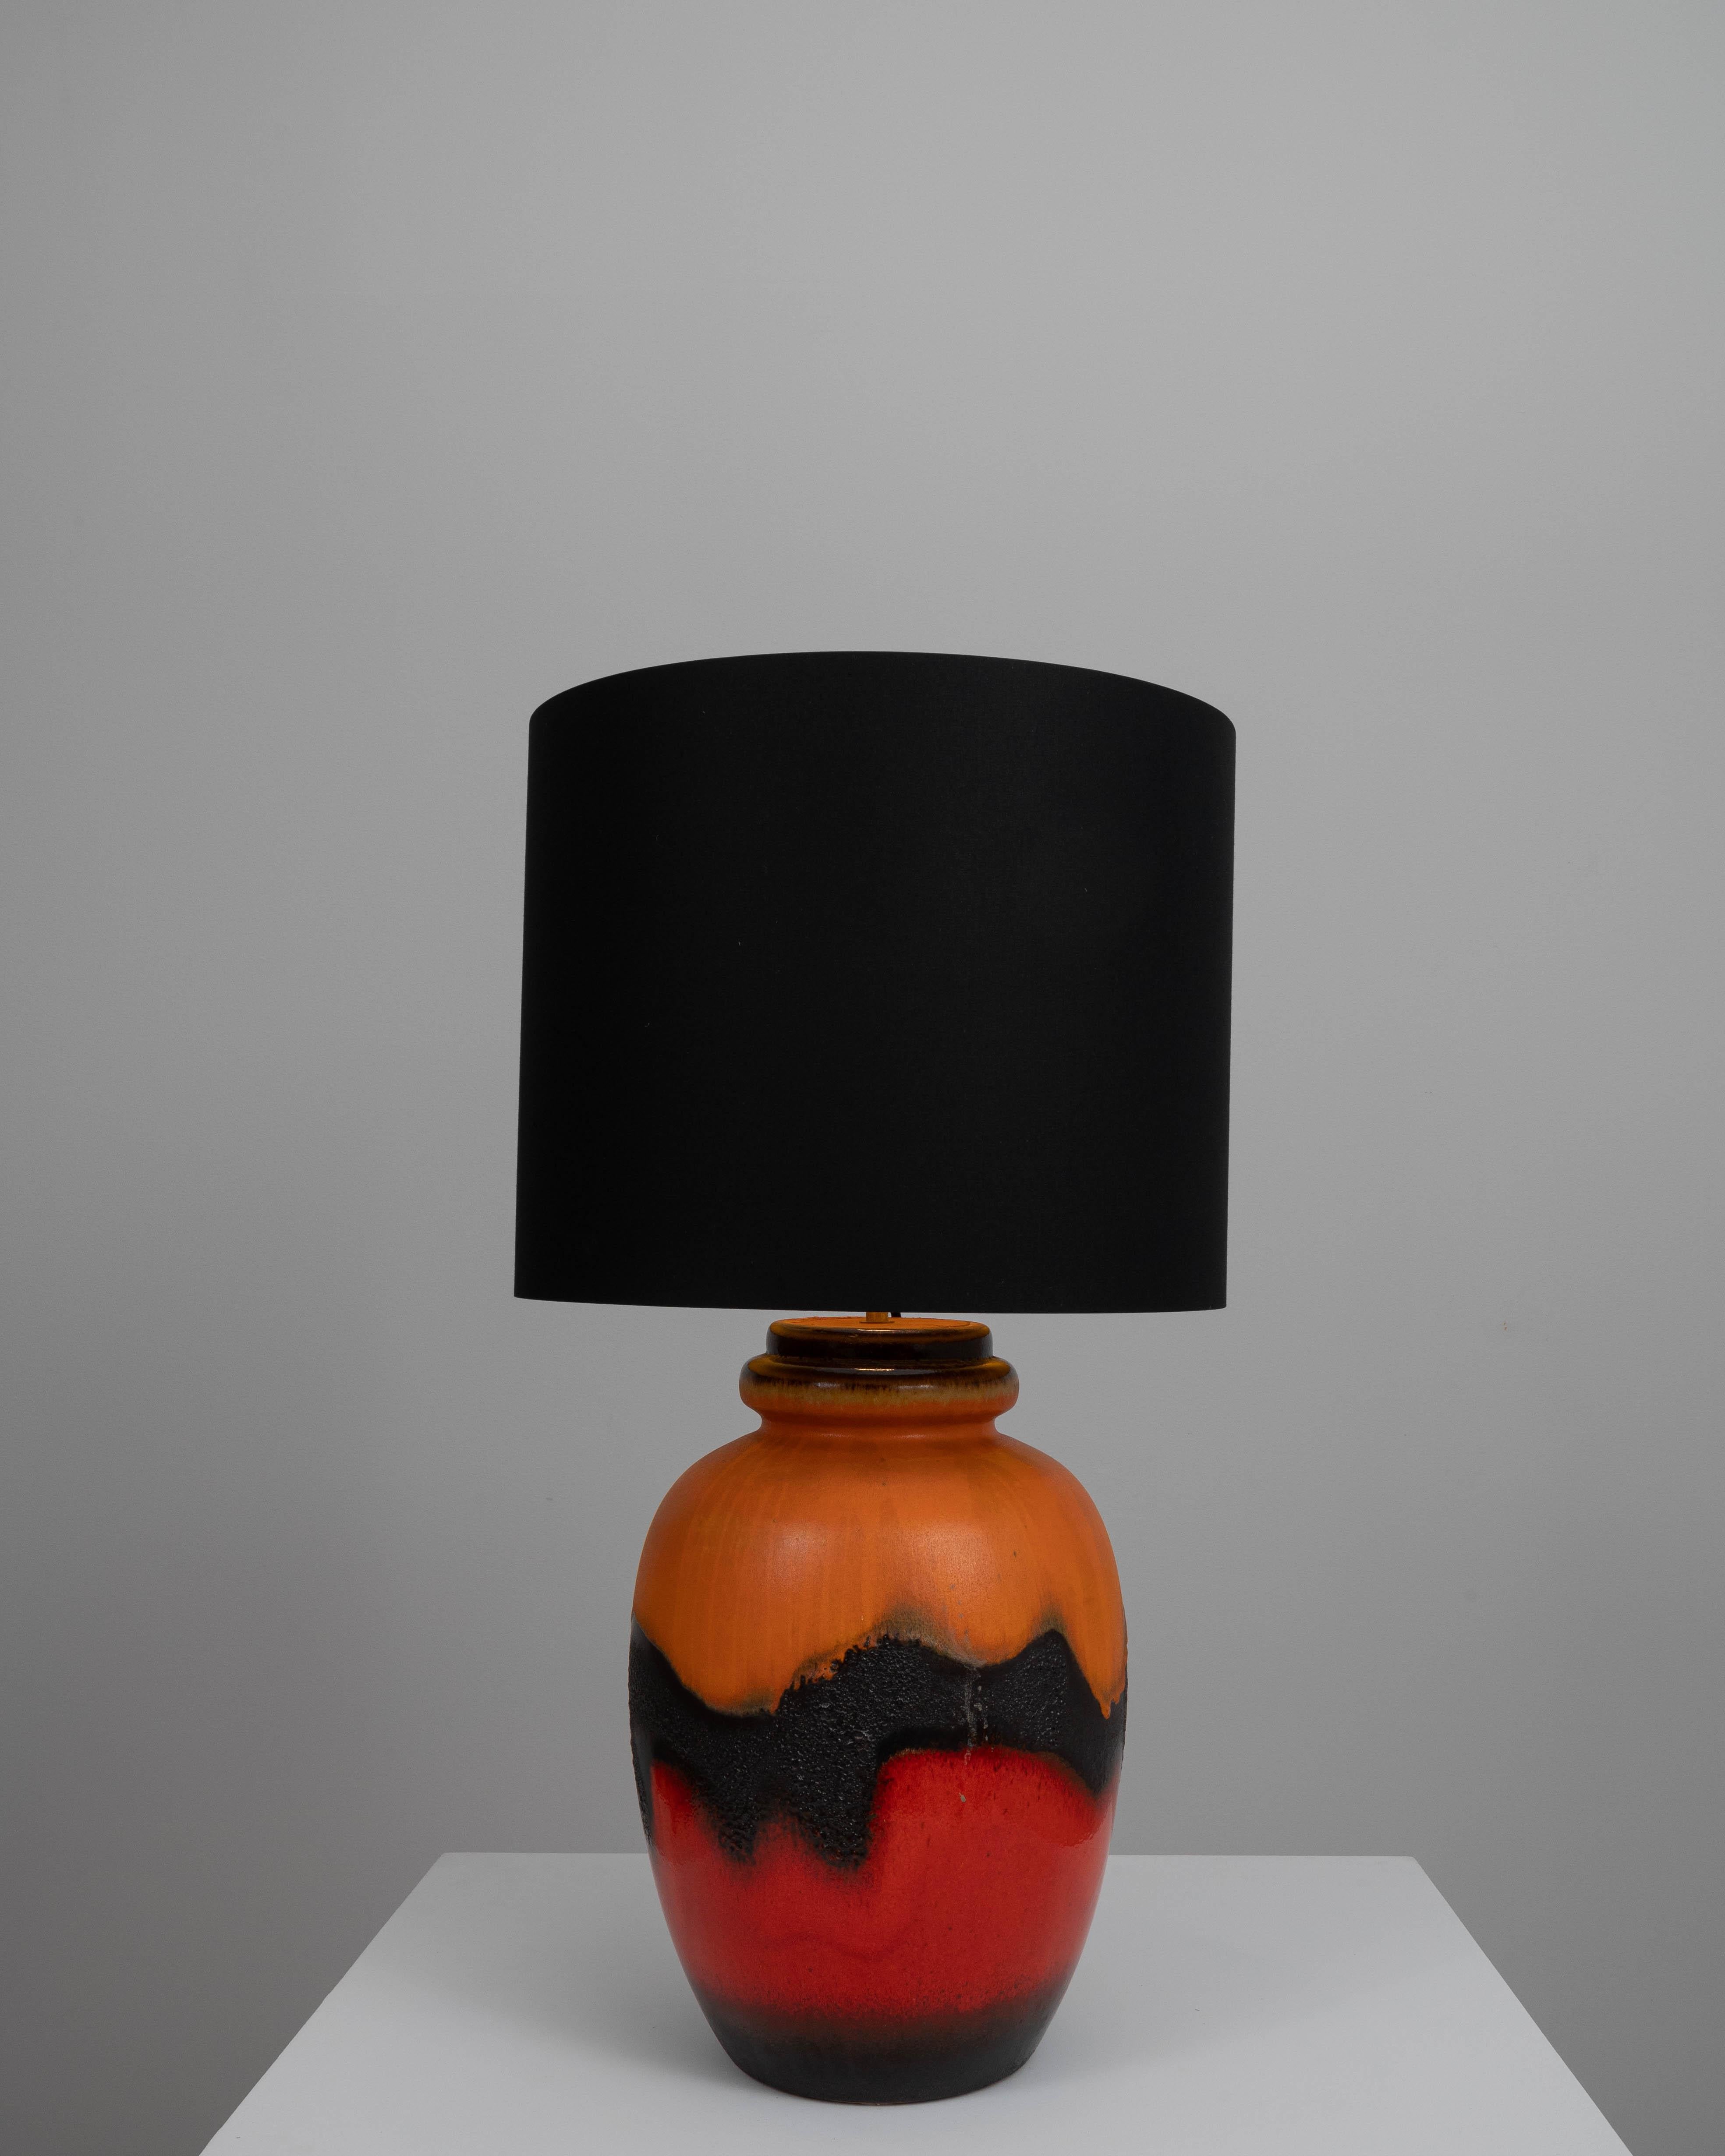 Add a bold statement to your interior with this striking 20th-century German ceramic table lamp. The vivid, fiery red base is artfully contrasted with a deep black texture, resembling the volcanic lava flows, and topped with a sleek black shade.